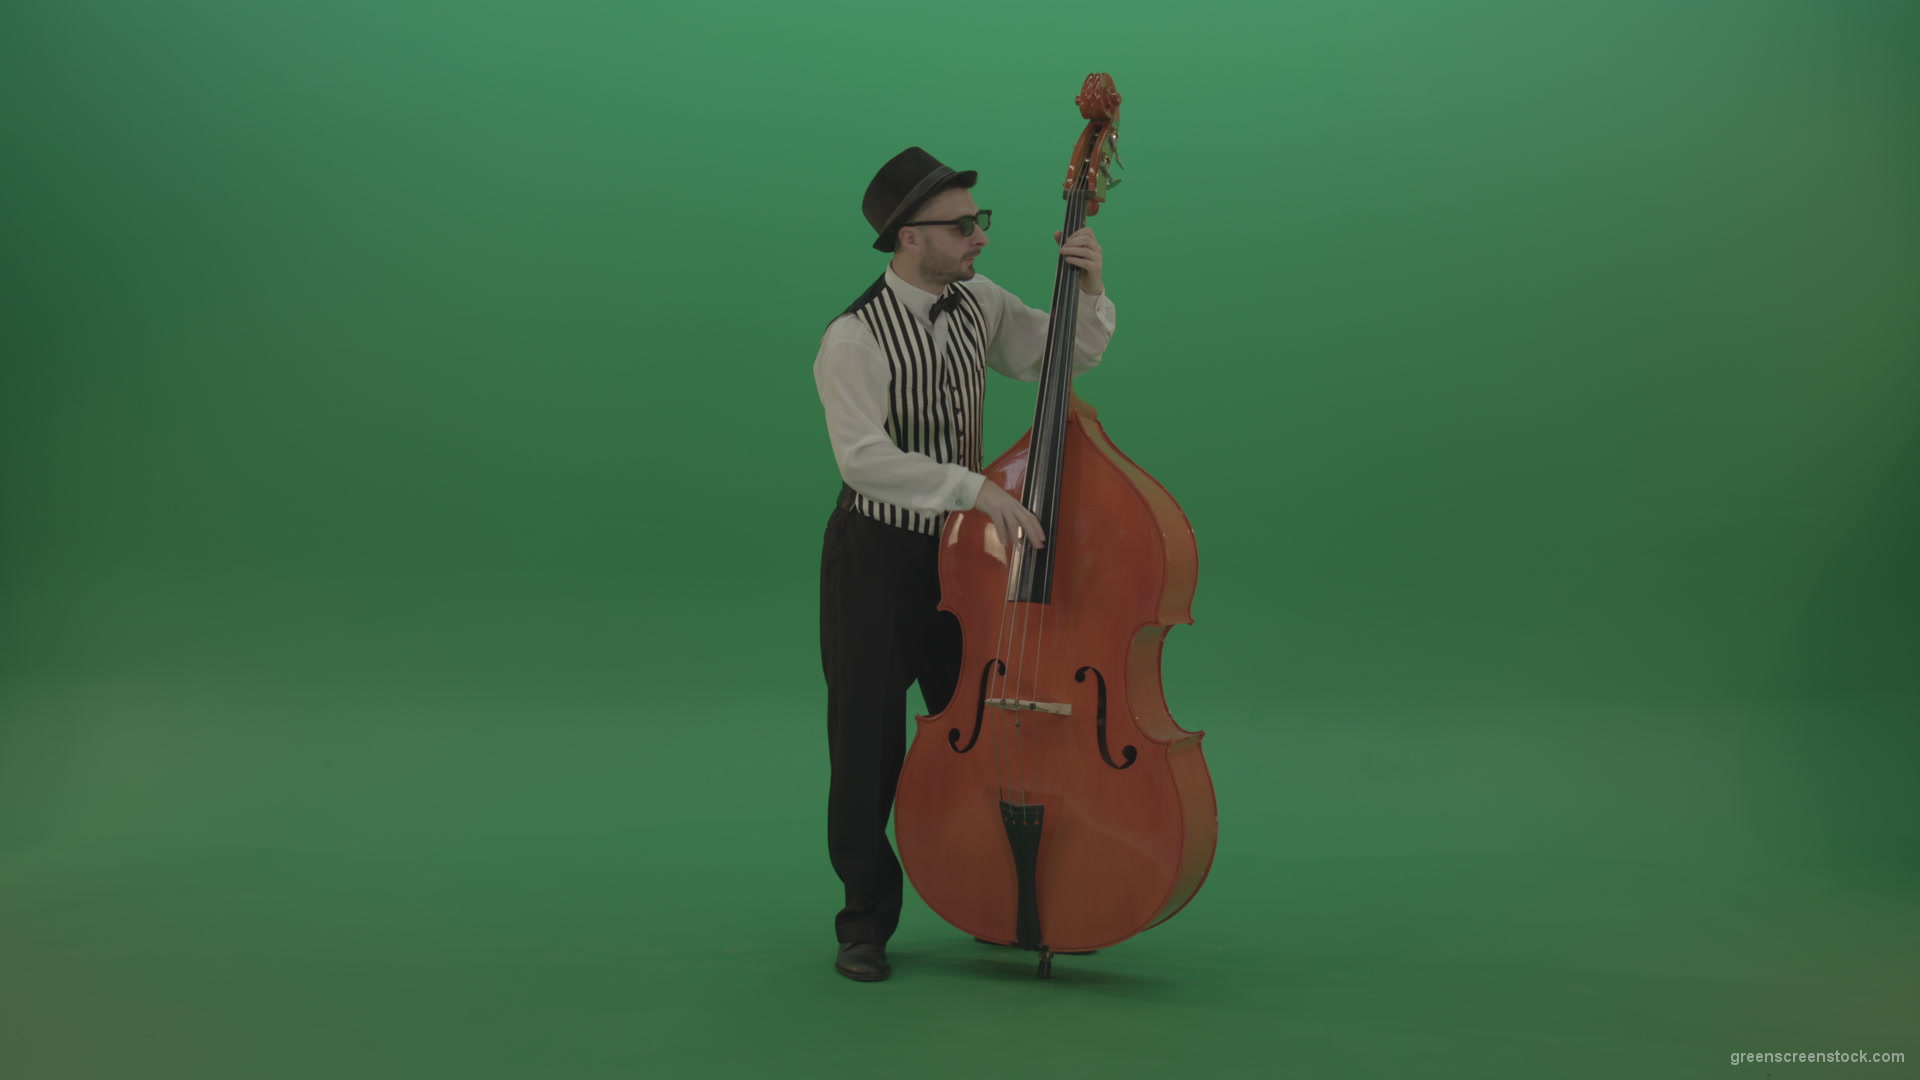 Full-size-man-play-jazz-on-double-bass-String-music-instrument-isolated-on-green-screen_004 Green Screen Stock